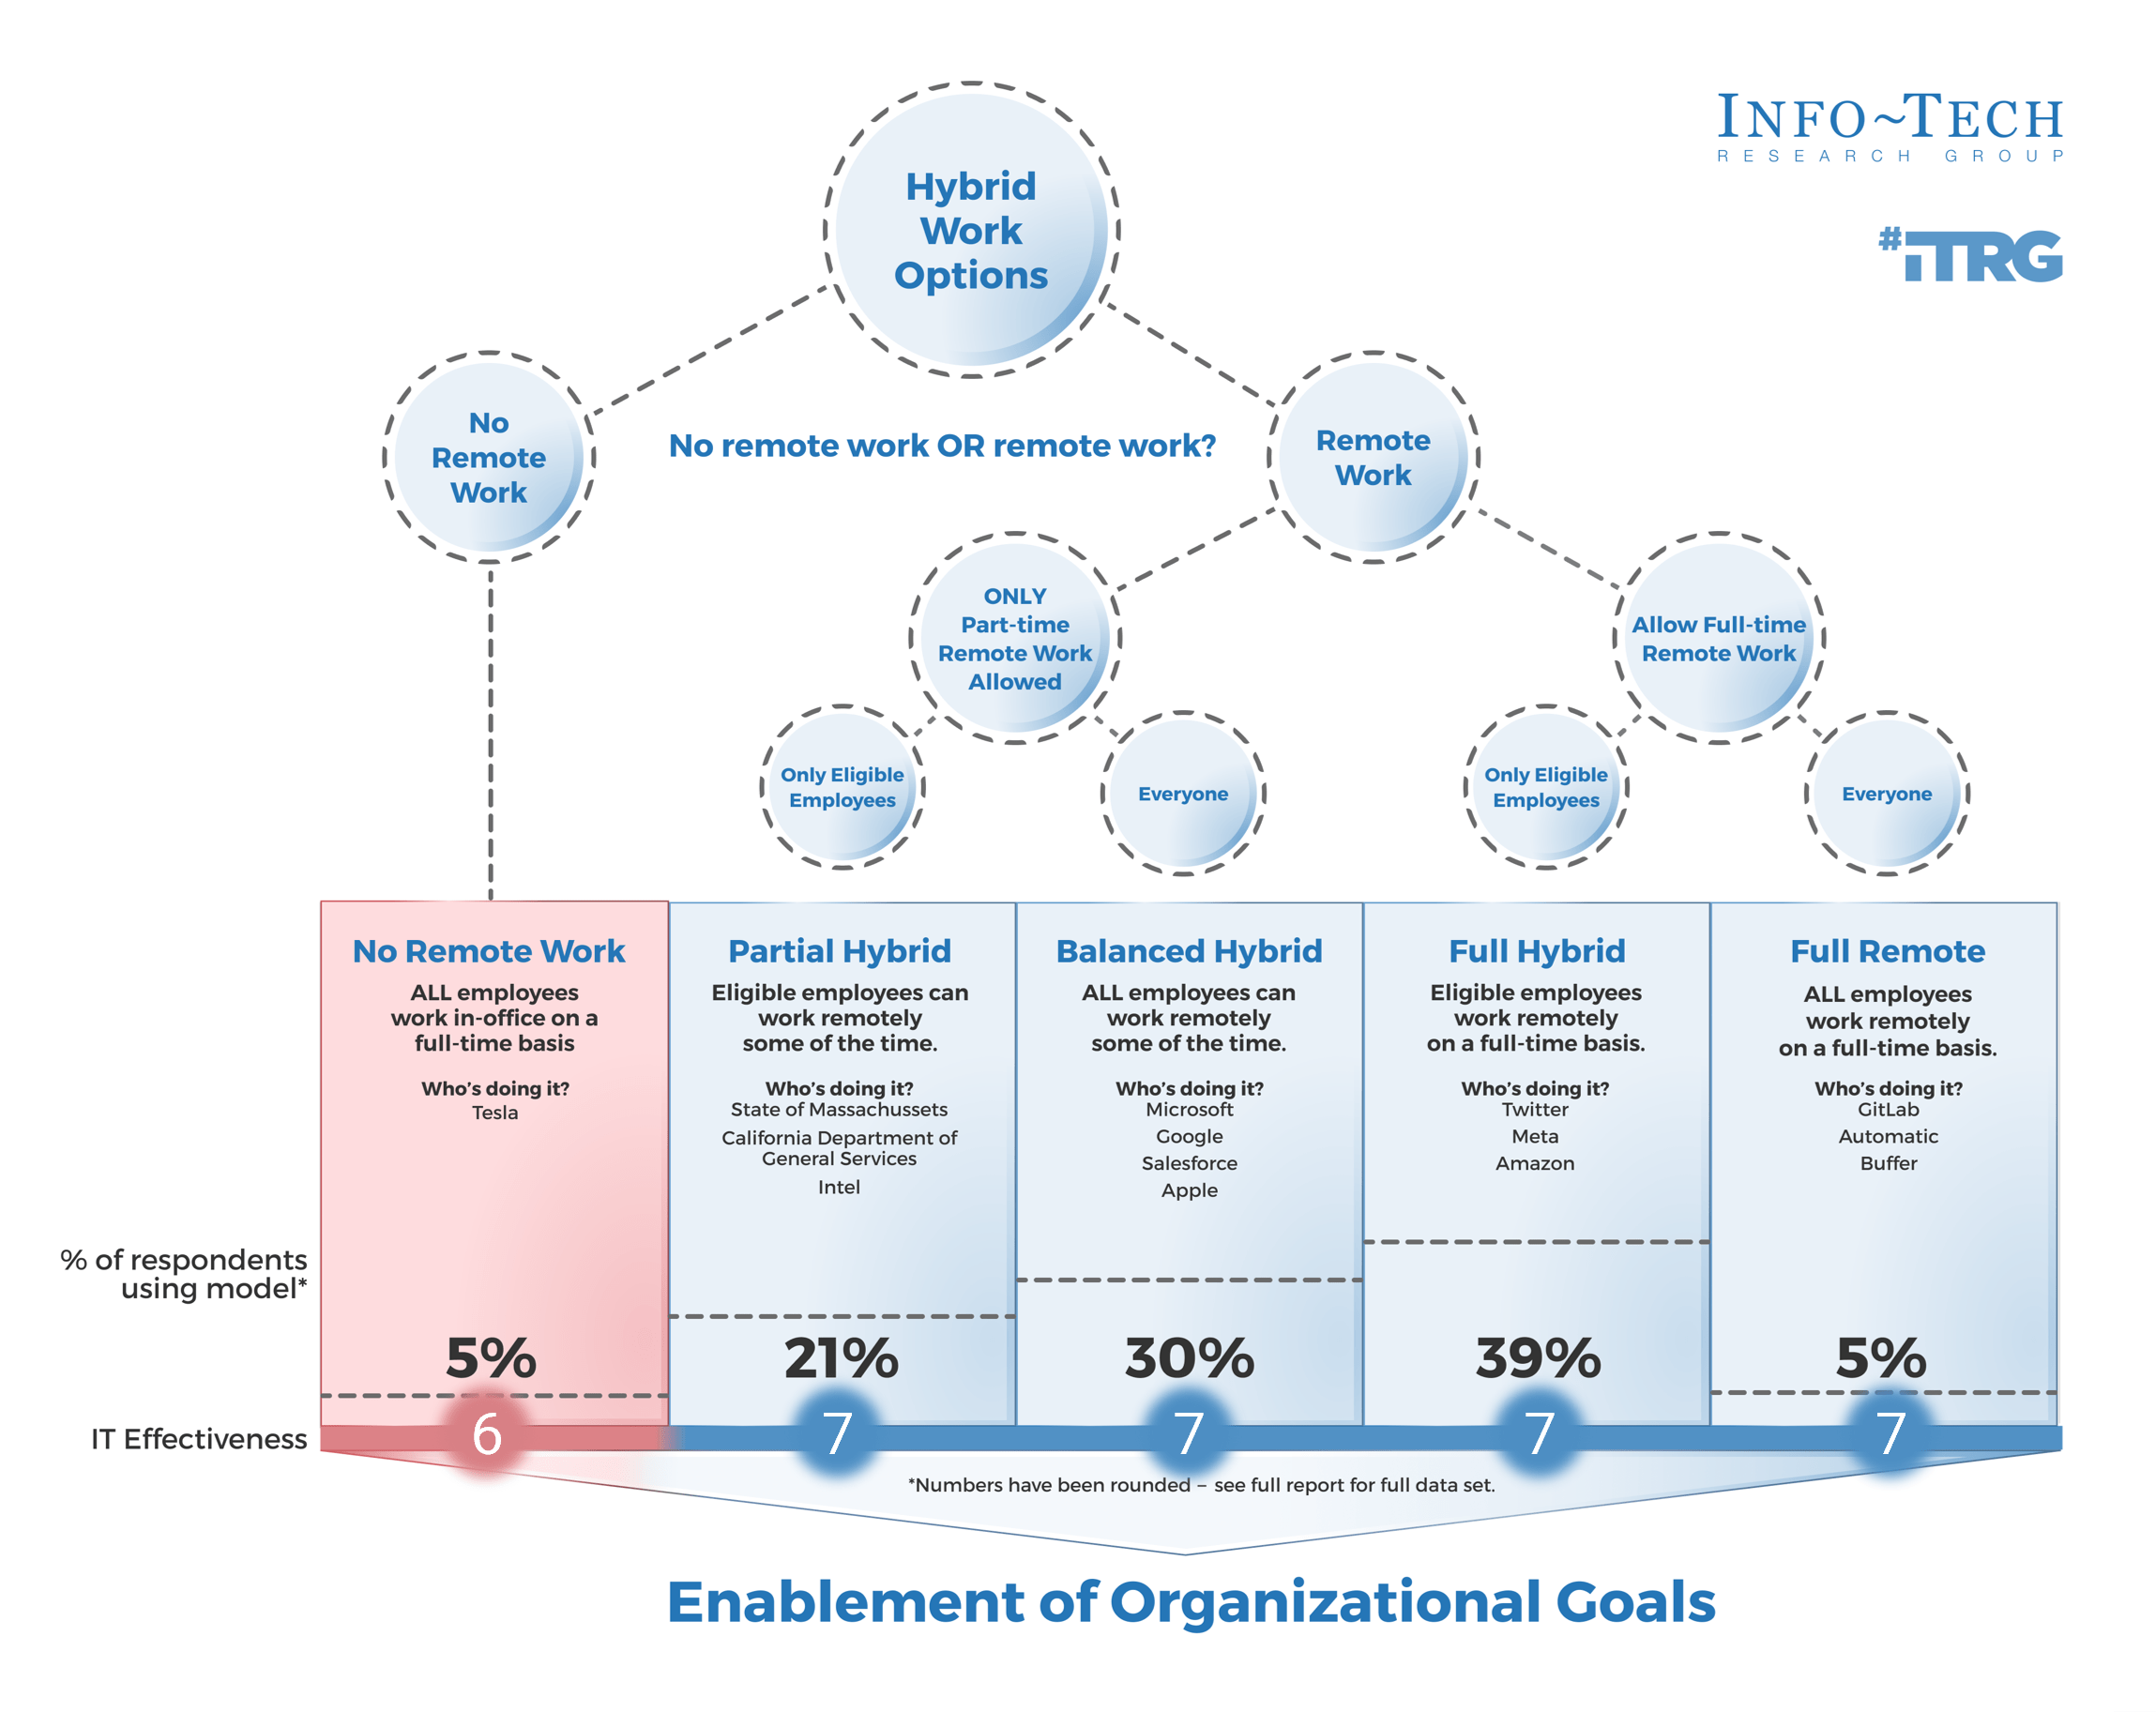 The image contains a screenshot of the Enablement of Organizational Goals.